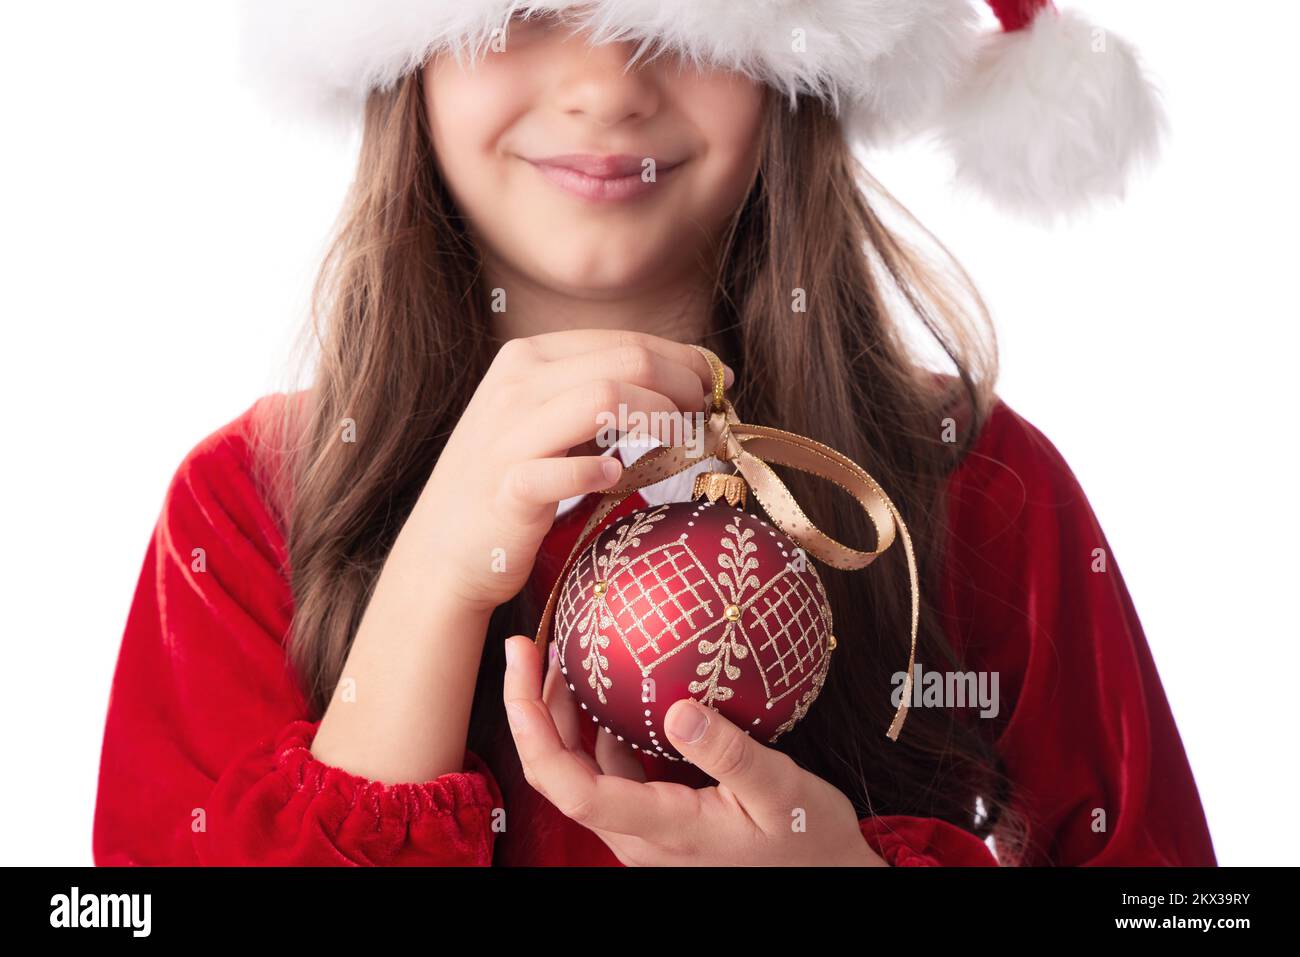 Smiling woman with Christmas tree shining ball, bauble, girl posing in red dress of Santa Claus on white background Stock Photo